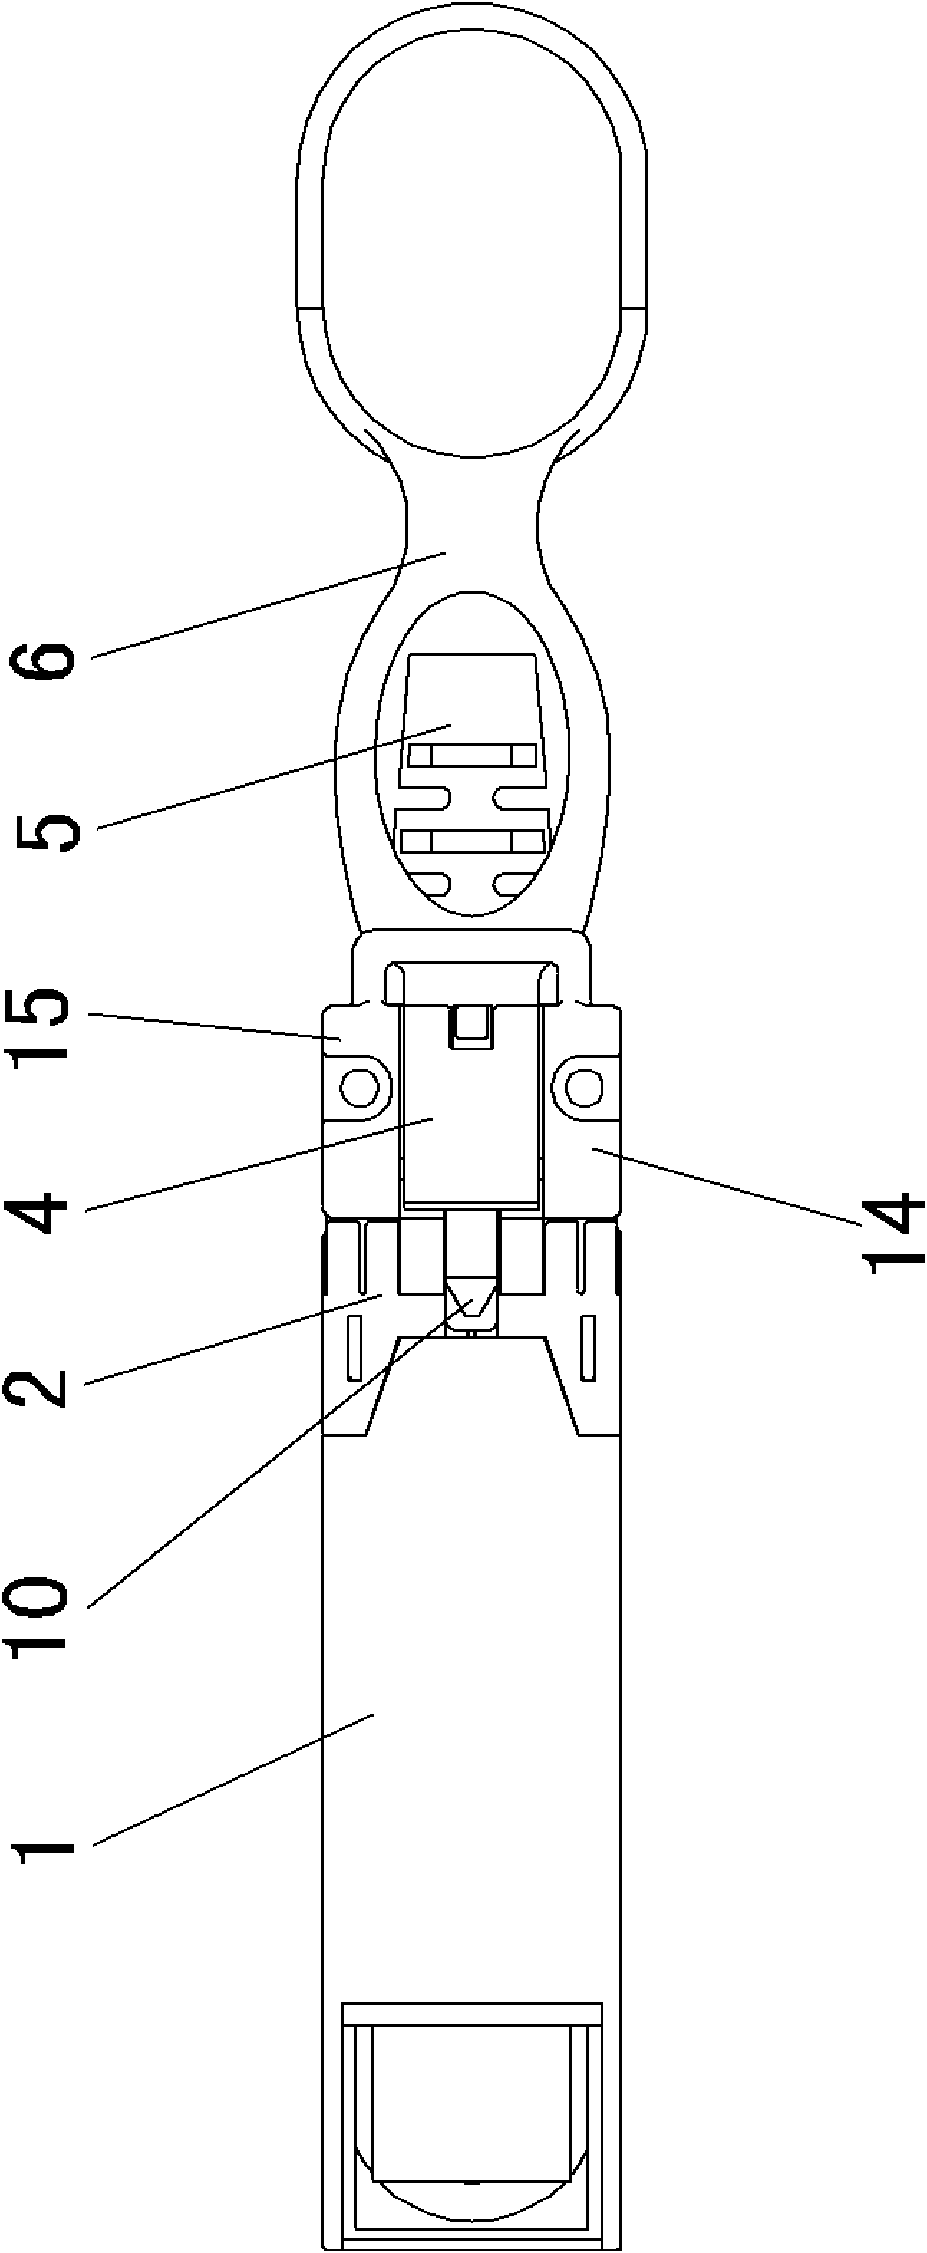 Guy-wire-knockout electric connector and guy-wire-knockout electric connector assembly